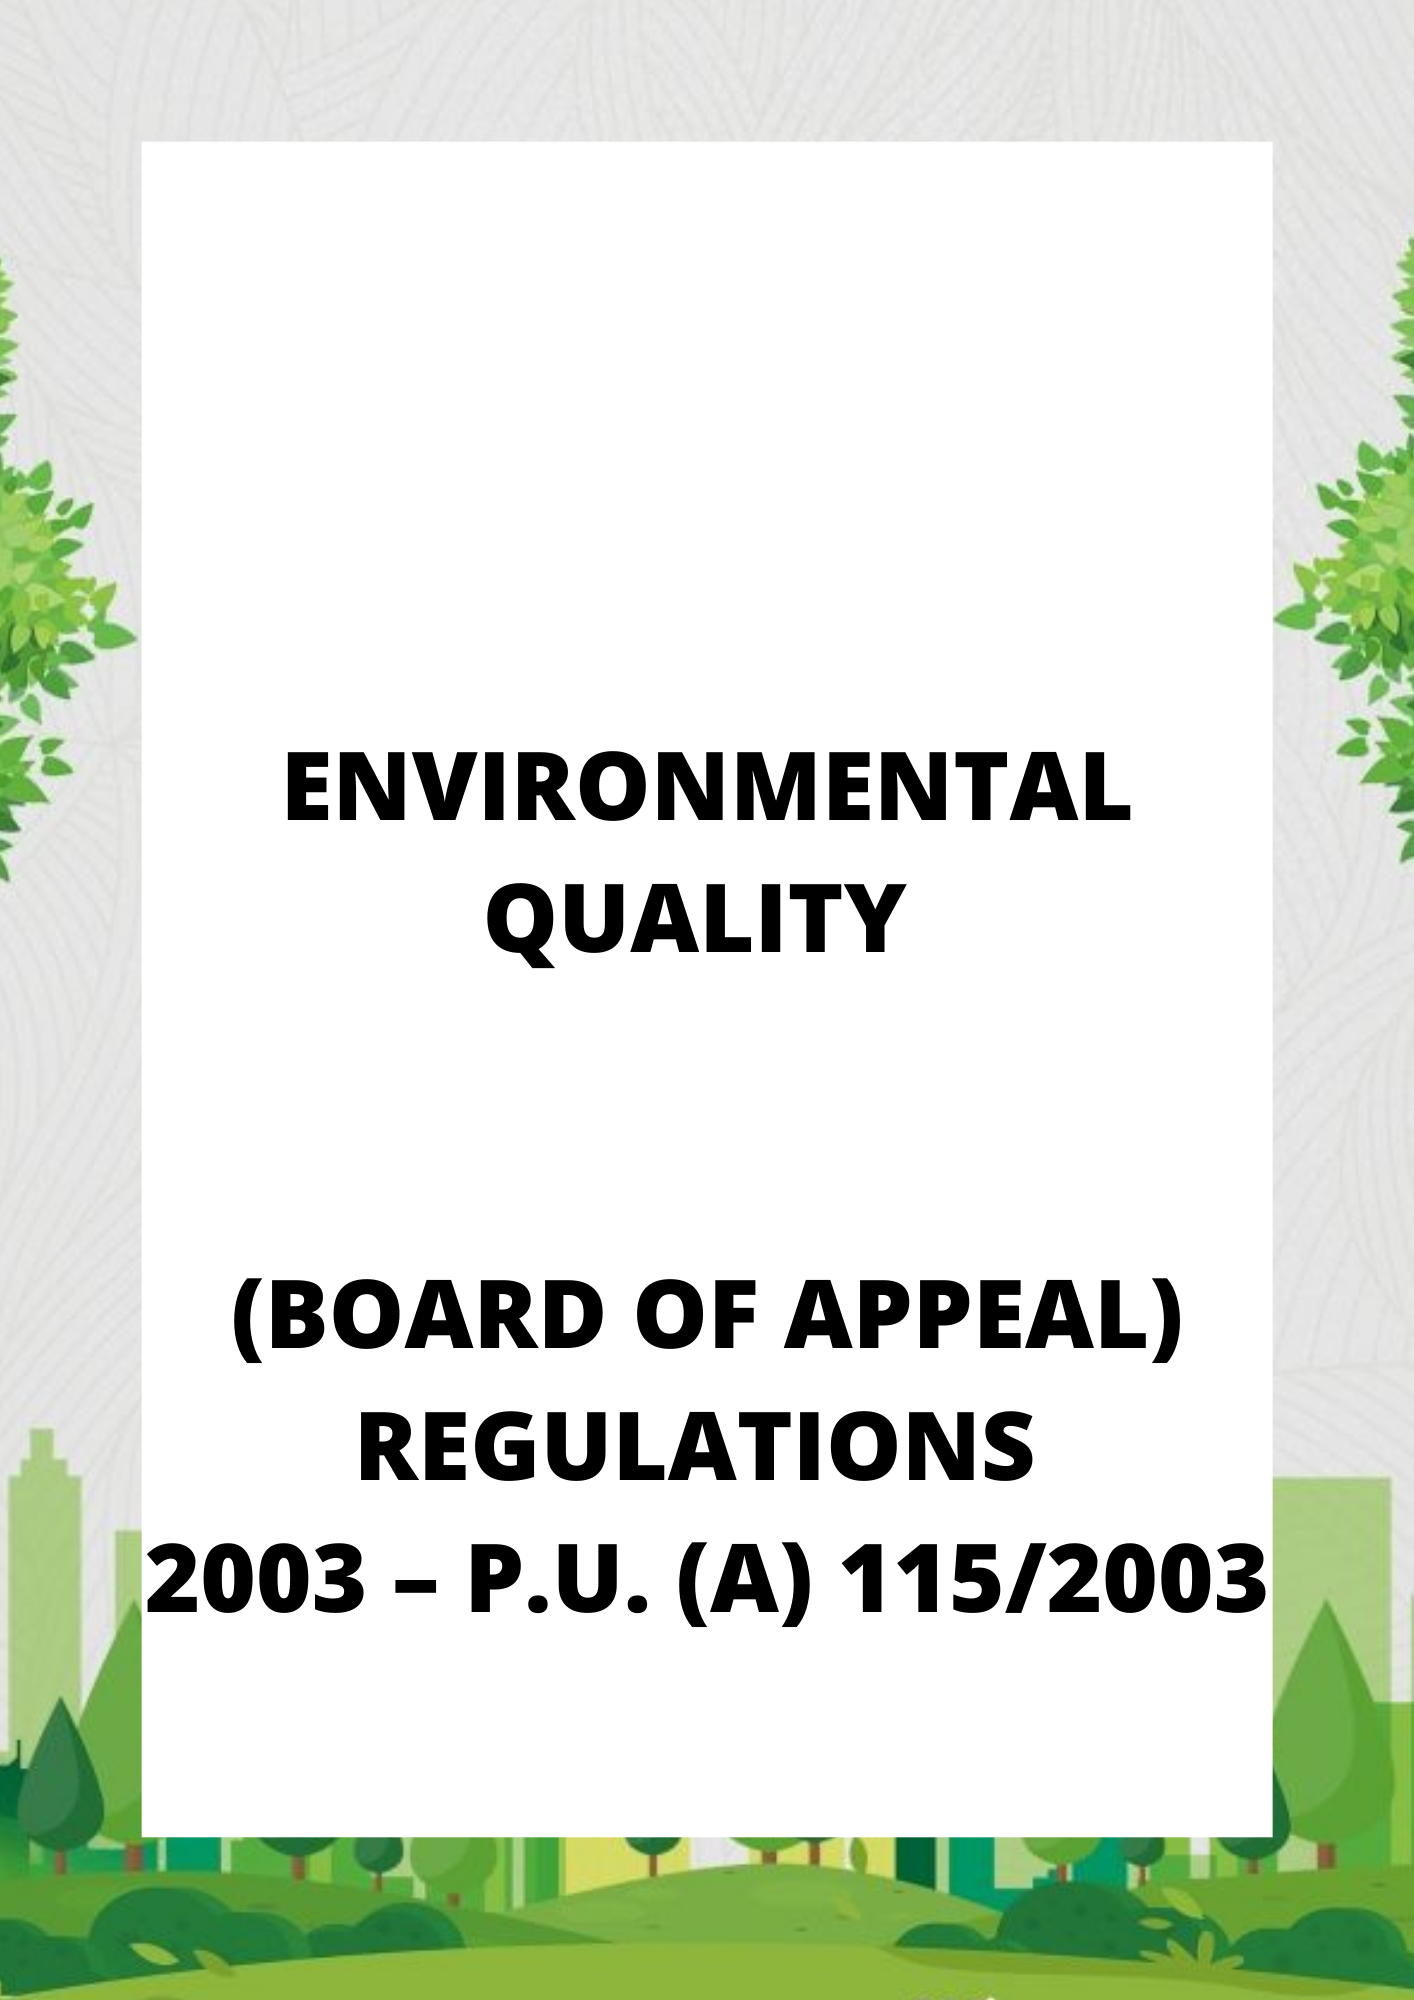 Environmental Quality (Board of Appeal) Regulations 2003 – P.U. (A) 1152003